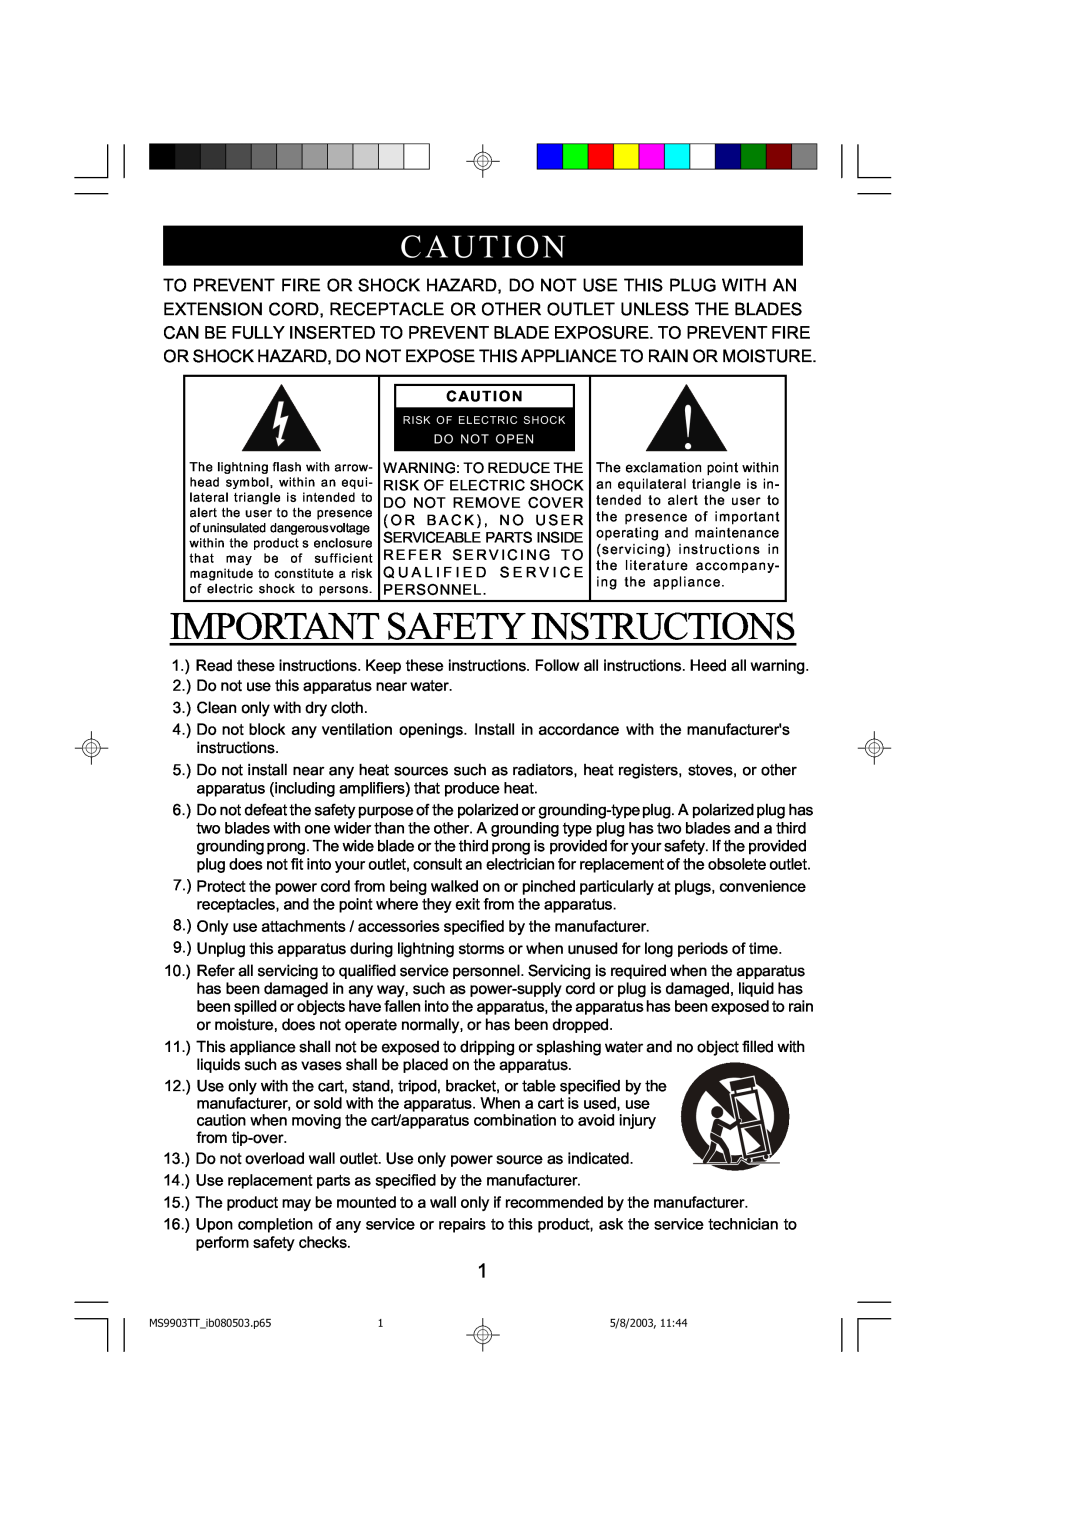 Emerson MS9904TTC owner manual Important Safety Instructions, Caut I On, Caut I O N 